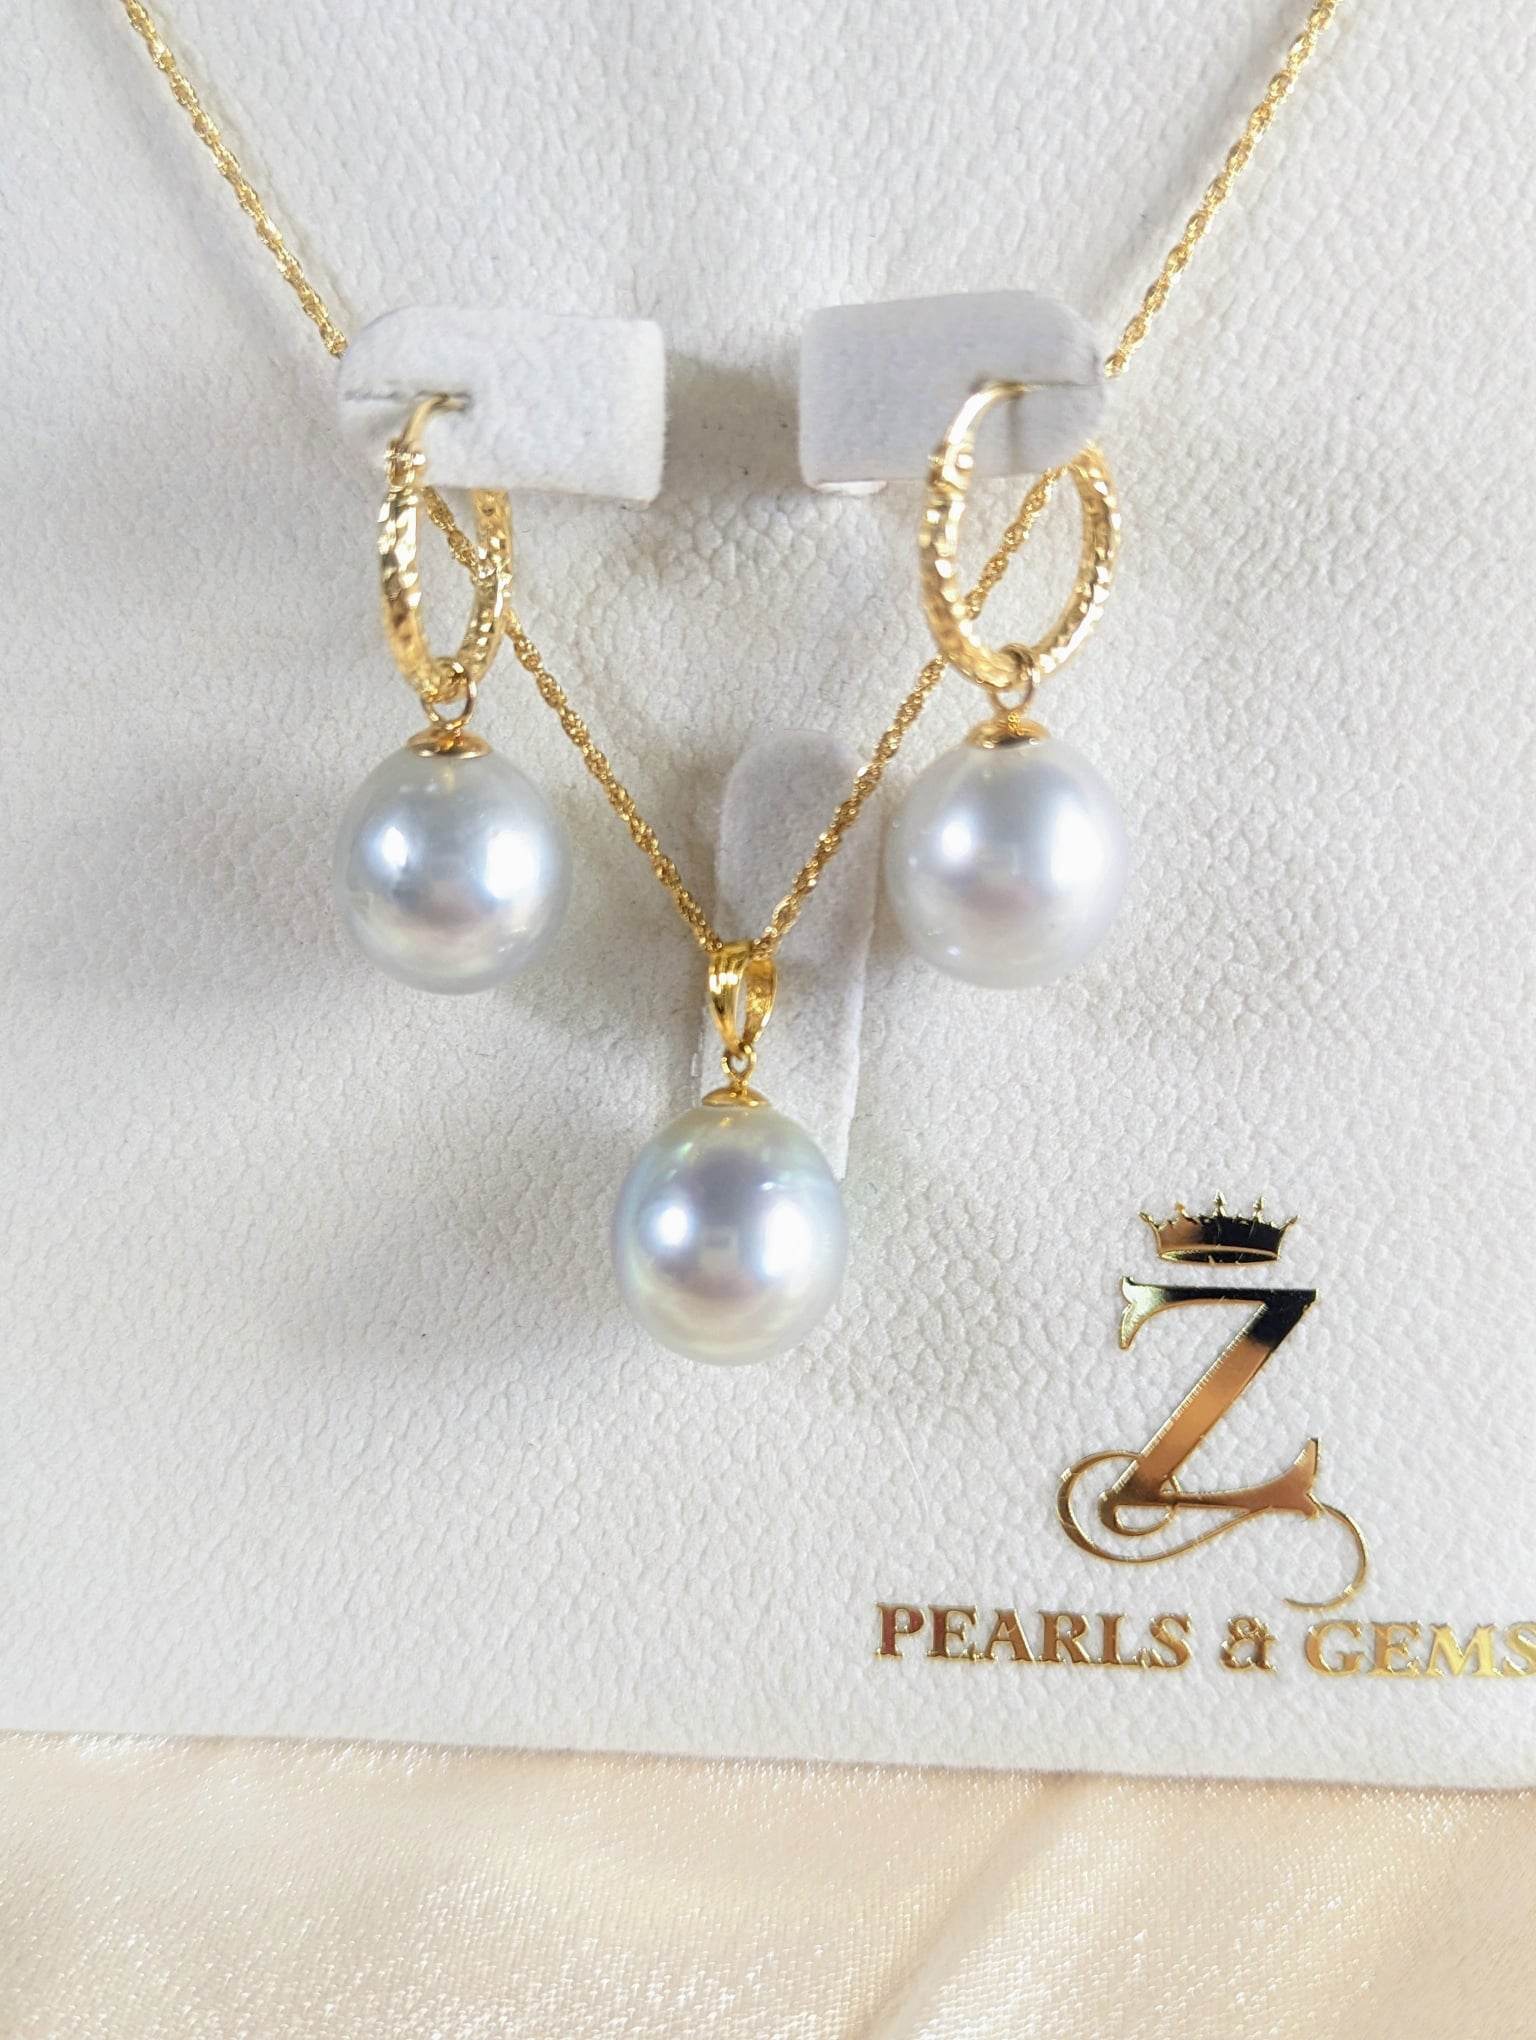 Exquisite South Sea Pearl Jewelry Set Collection | Z Pearls & Gems